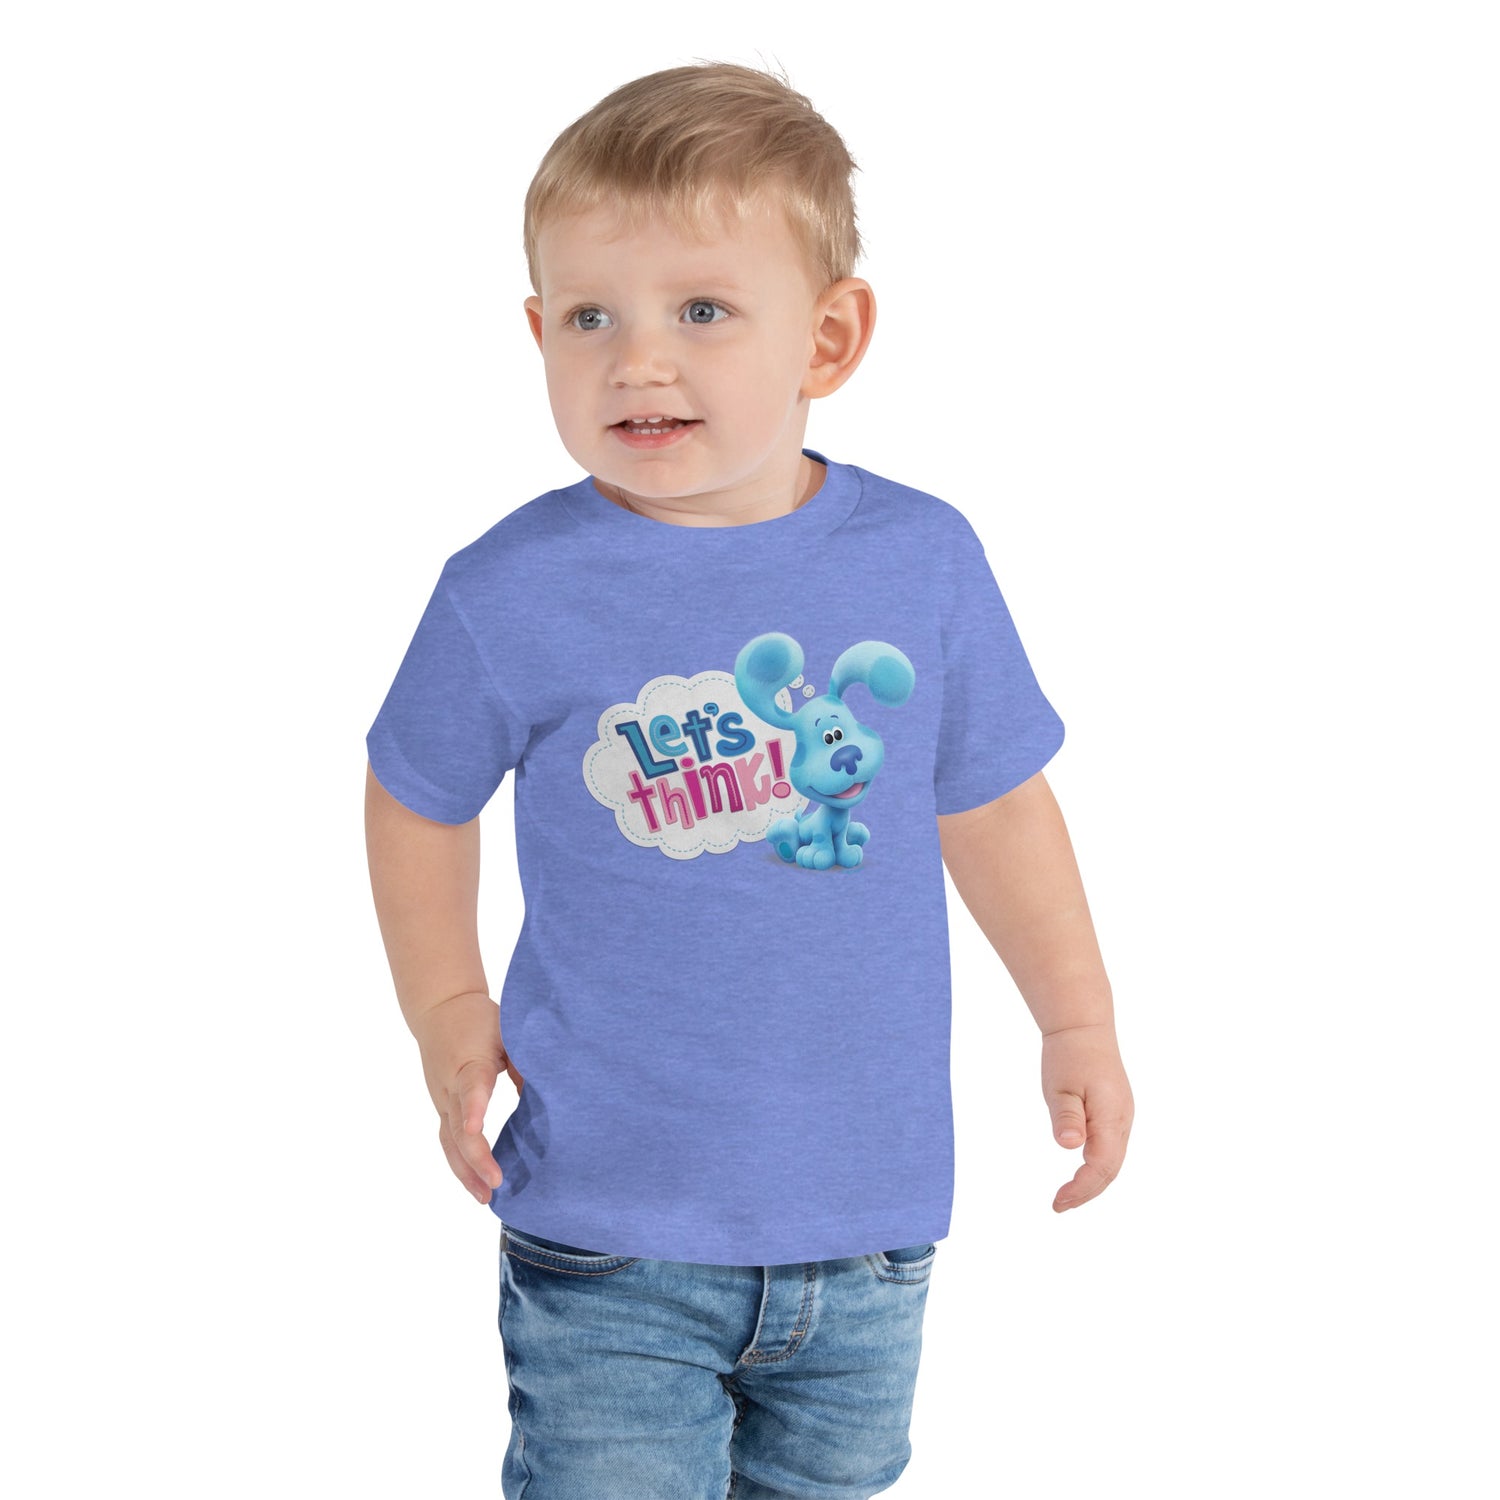 Blue's Clues & You! Let's Think Toddler Short Sleeve T-Shirt